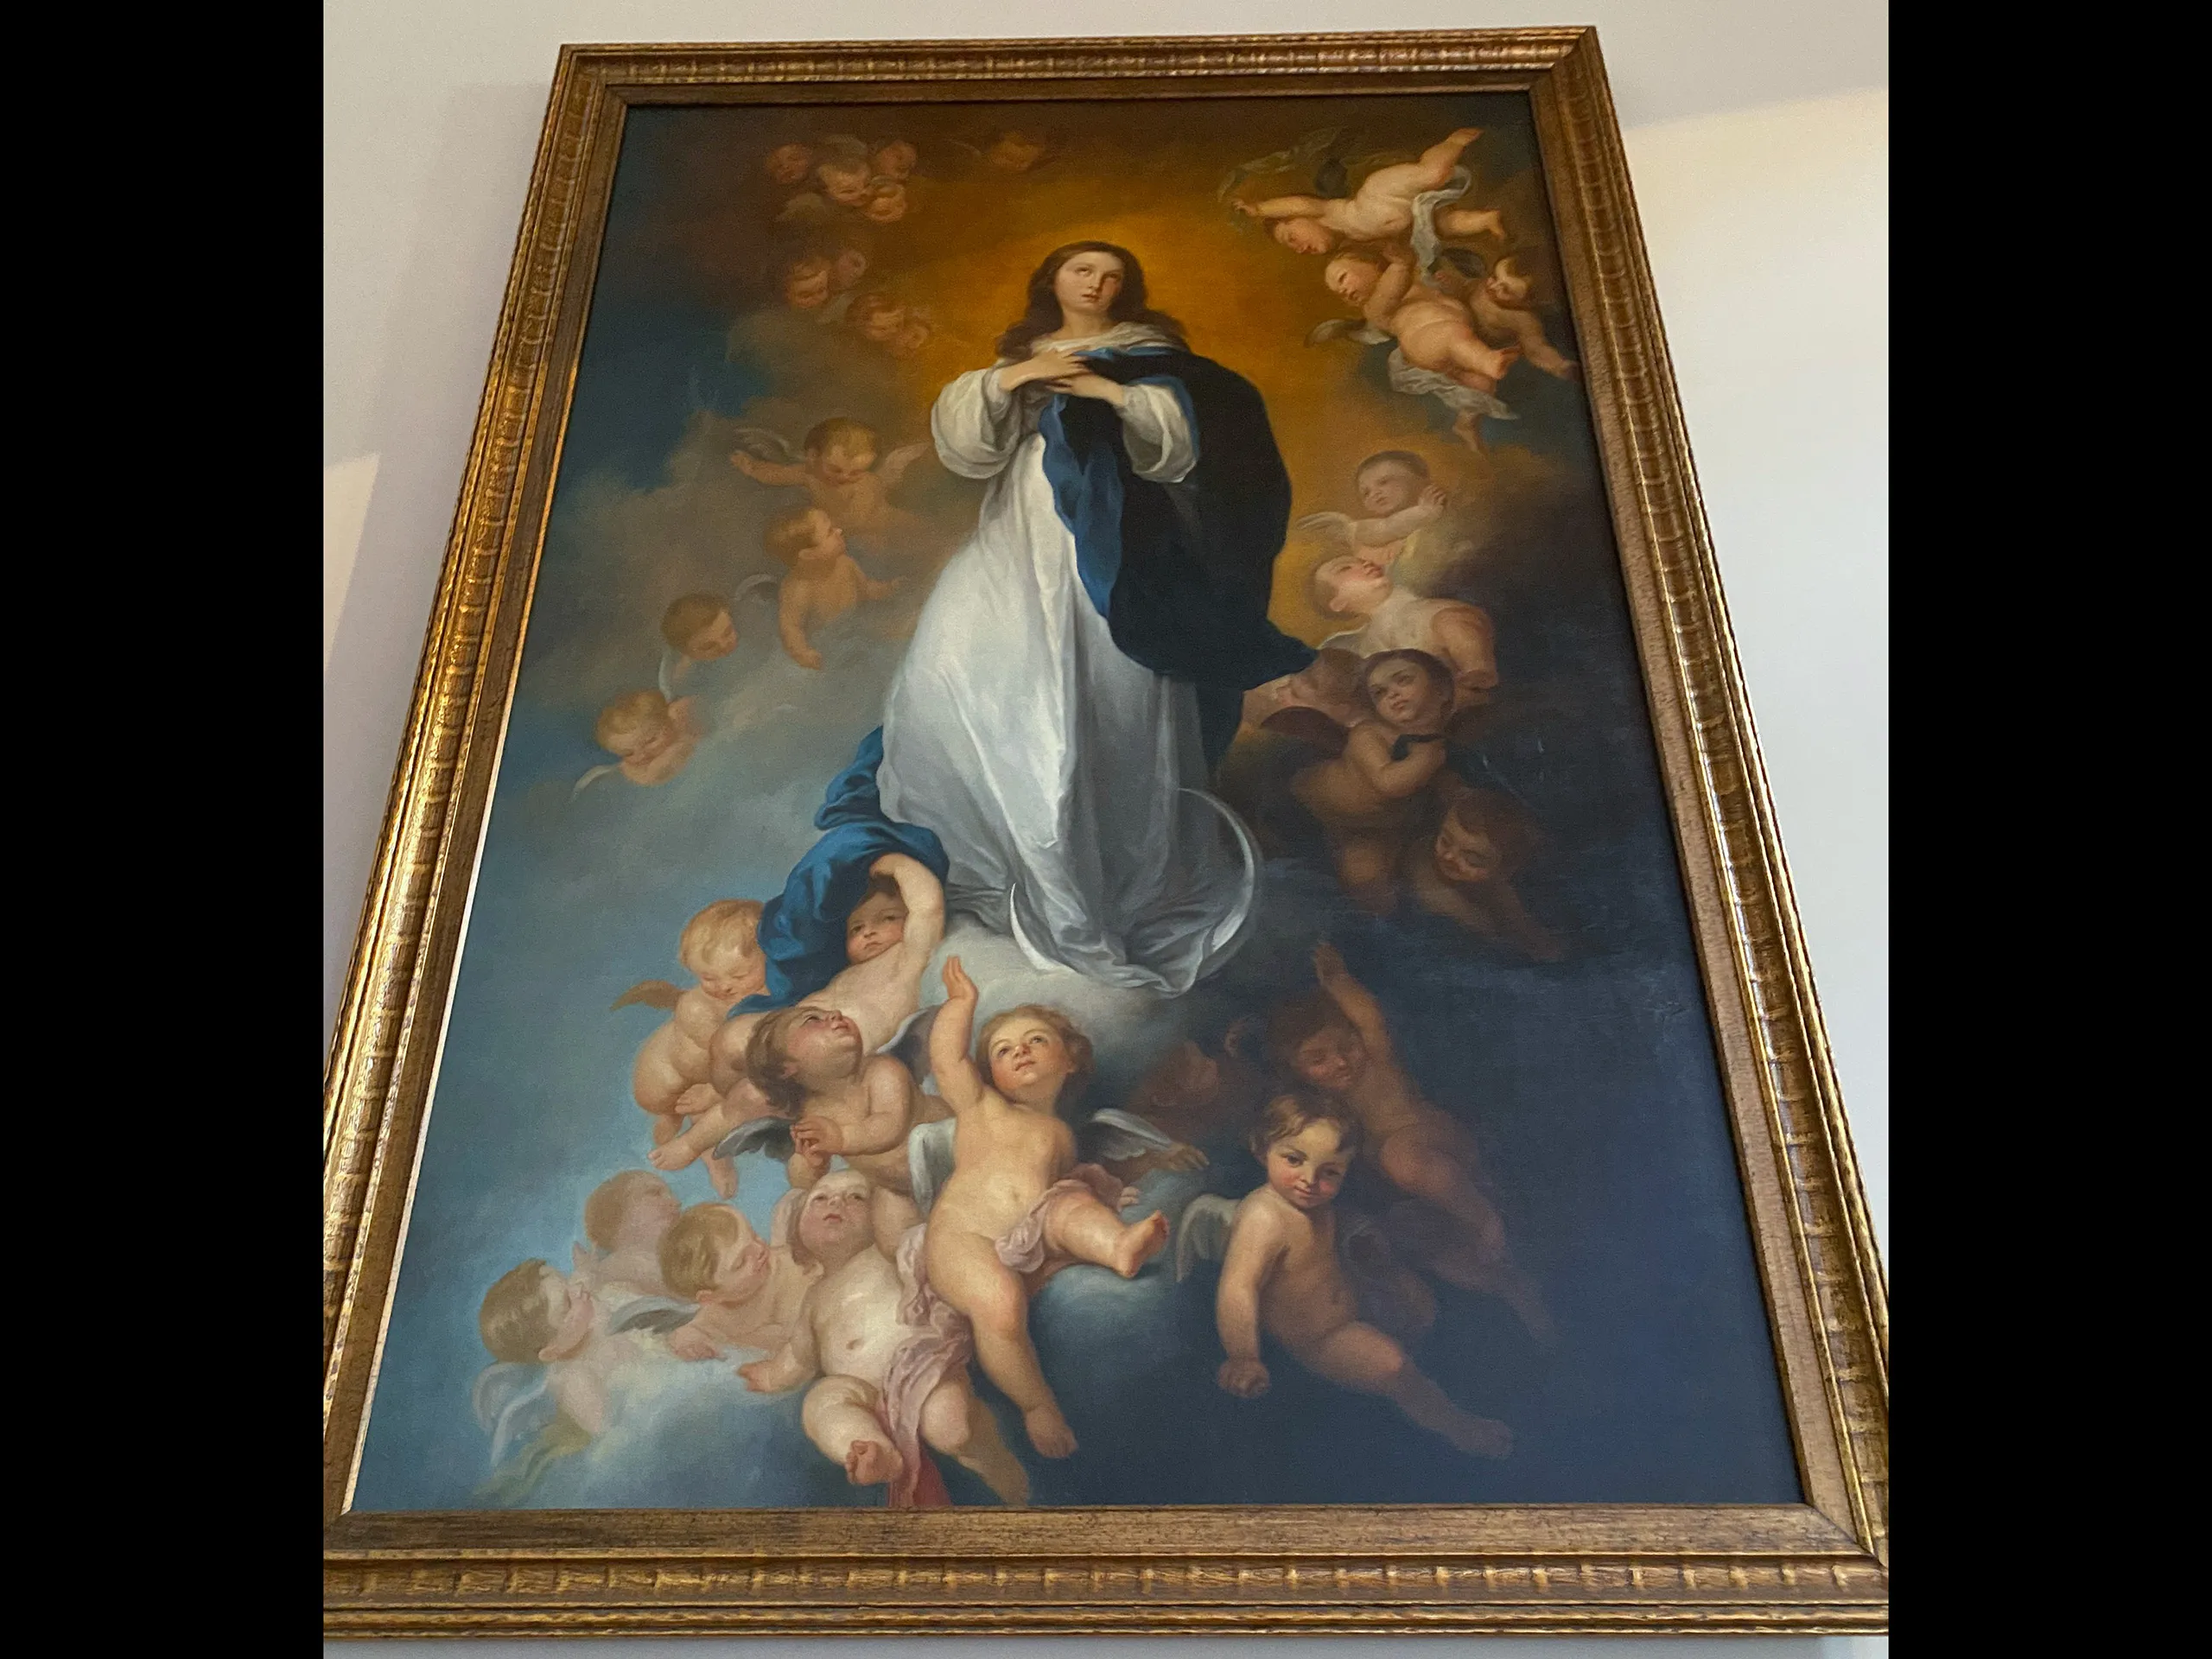 The Orlando basilica’s Marian-themed art on display includes this 17th-century painting of the Assumption of the Blessed Virgin Mary, attributed to Spanish painter Bartolomé Murillo. Credit: KEVIN SCHWEERS | CATHOLIC HERALD